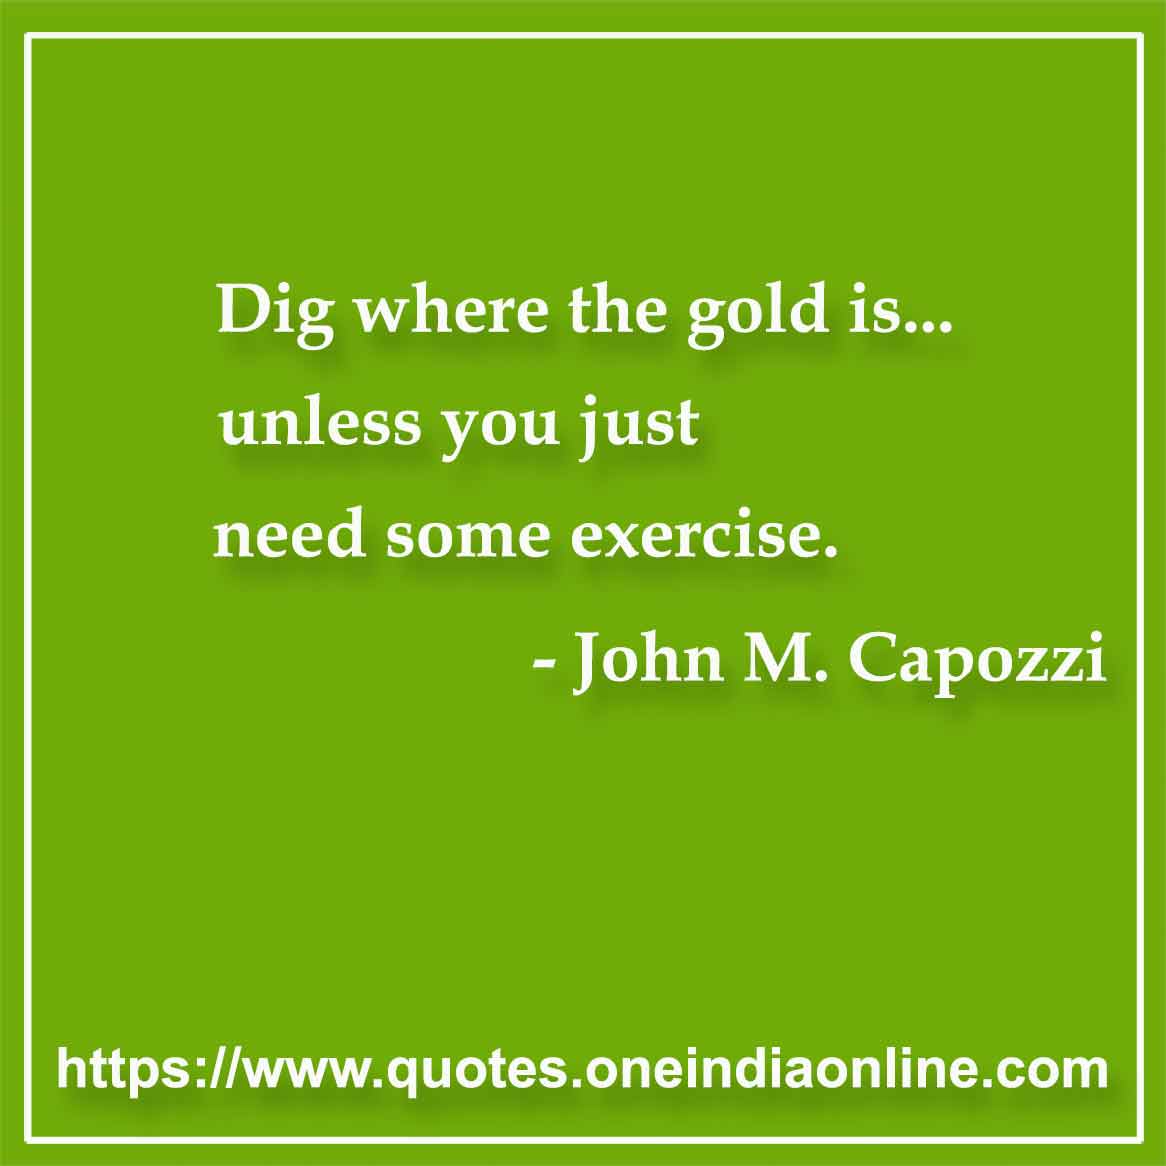 Dig where the gold is... unless you just need some exercise.

- John M. Capozzi Quote